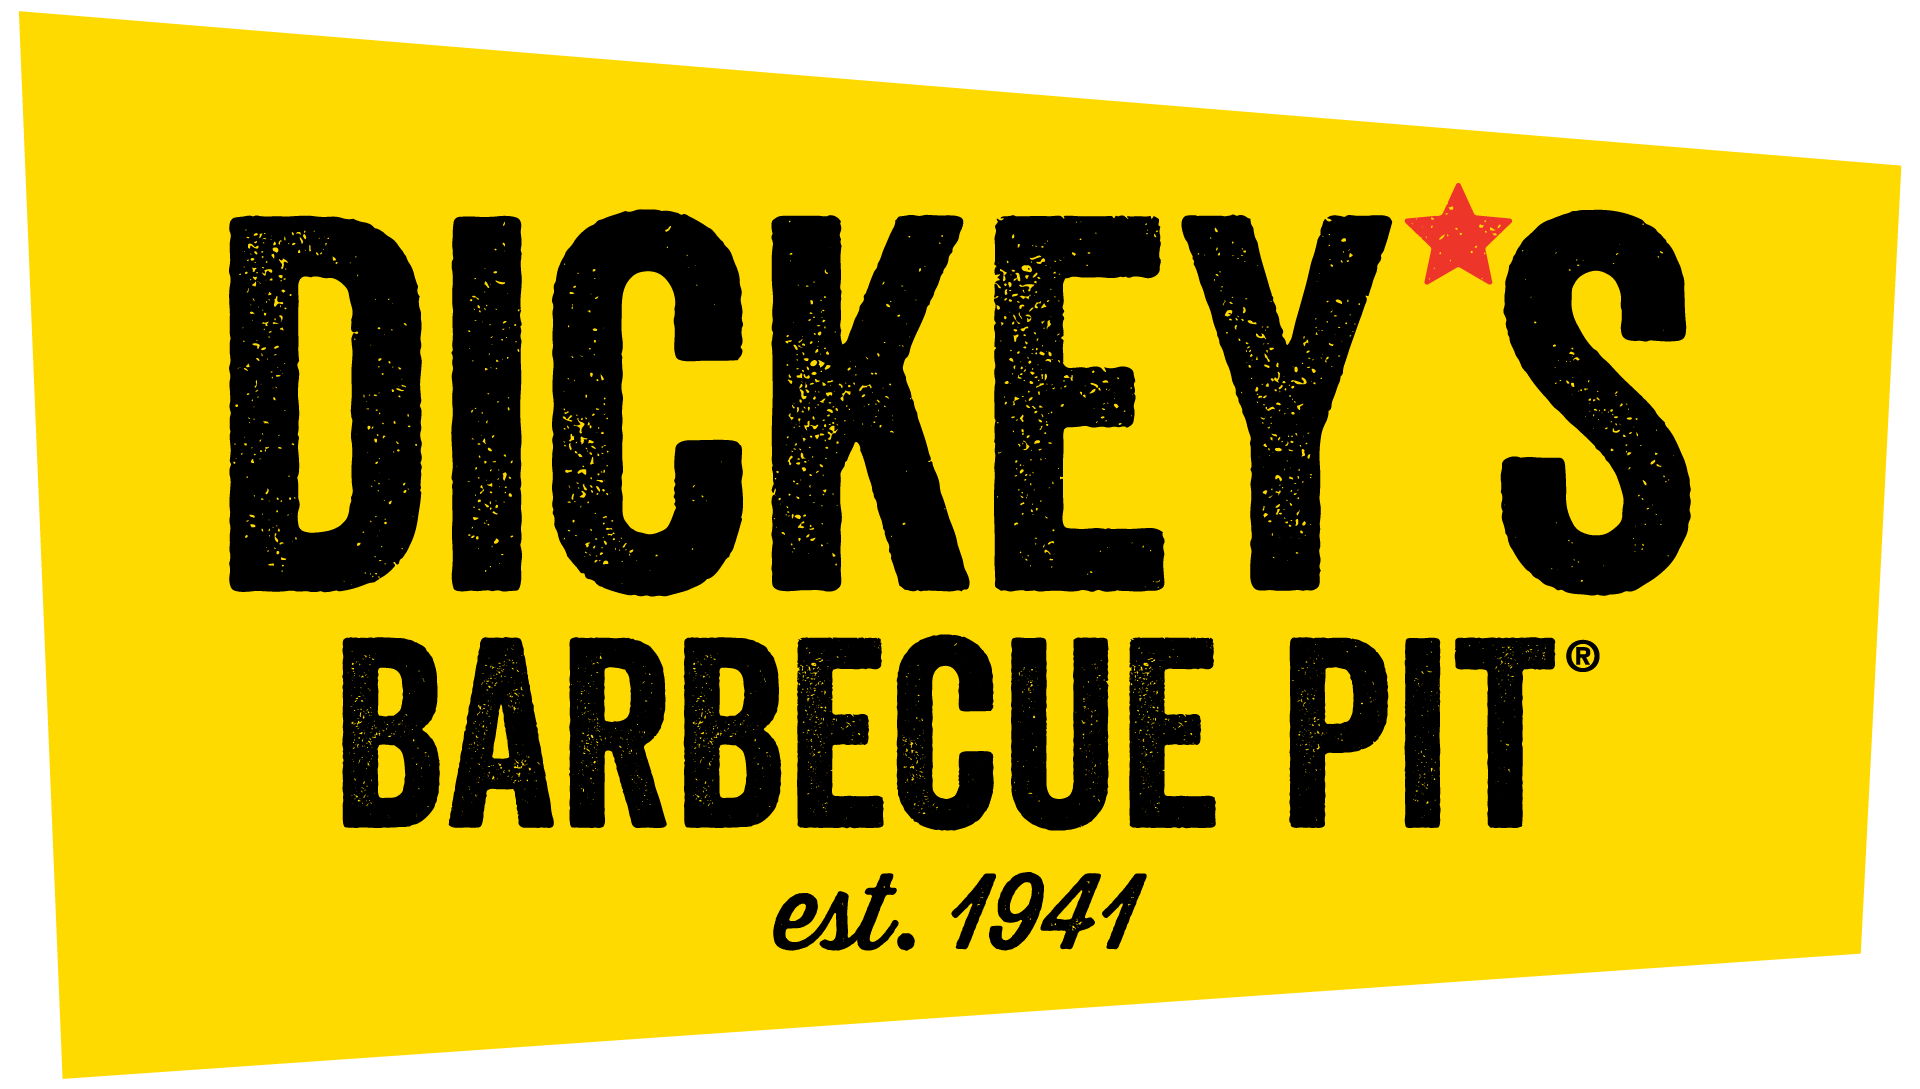 Dickey’s Barbecue an